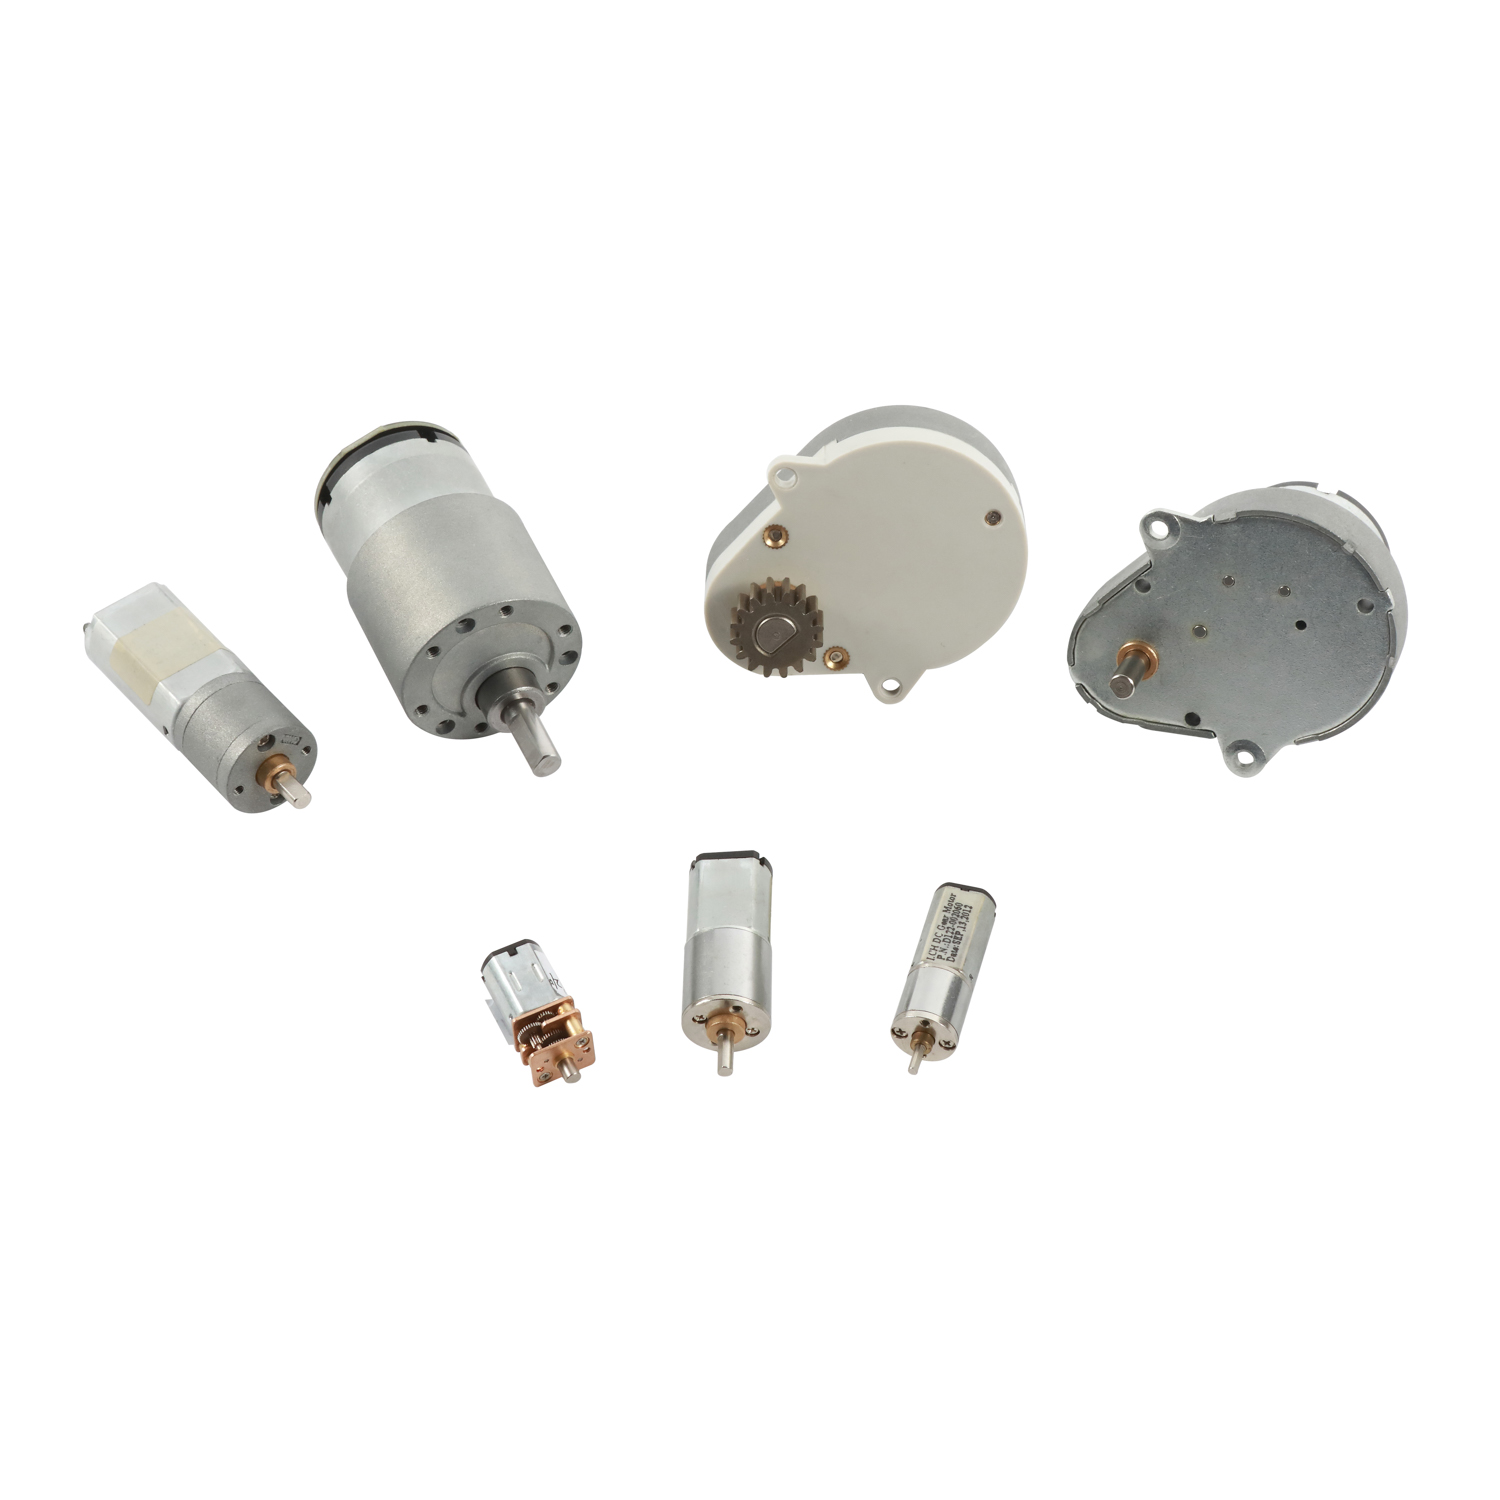 Electric 6v DC Geared Motor